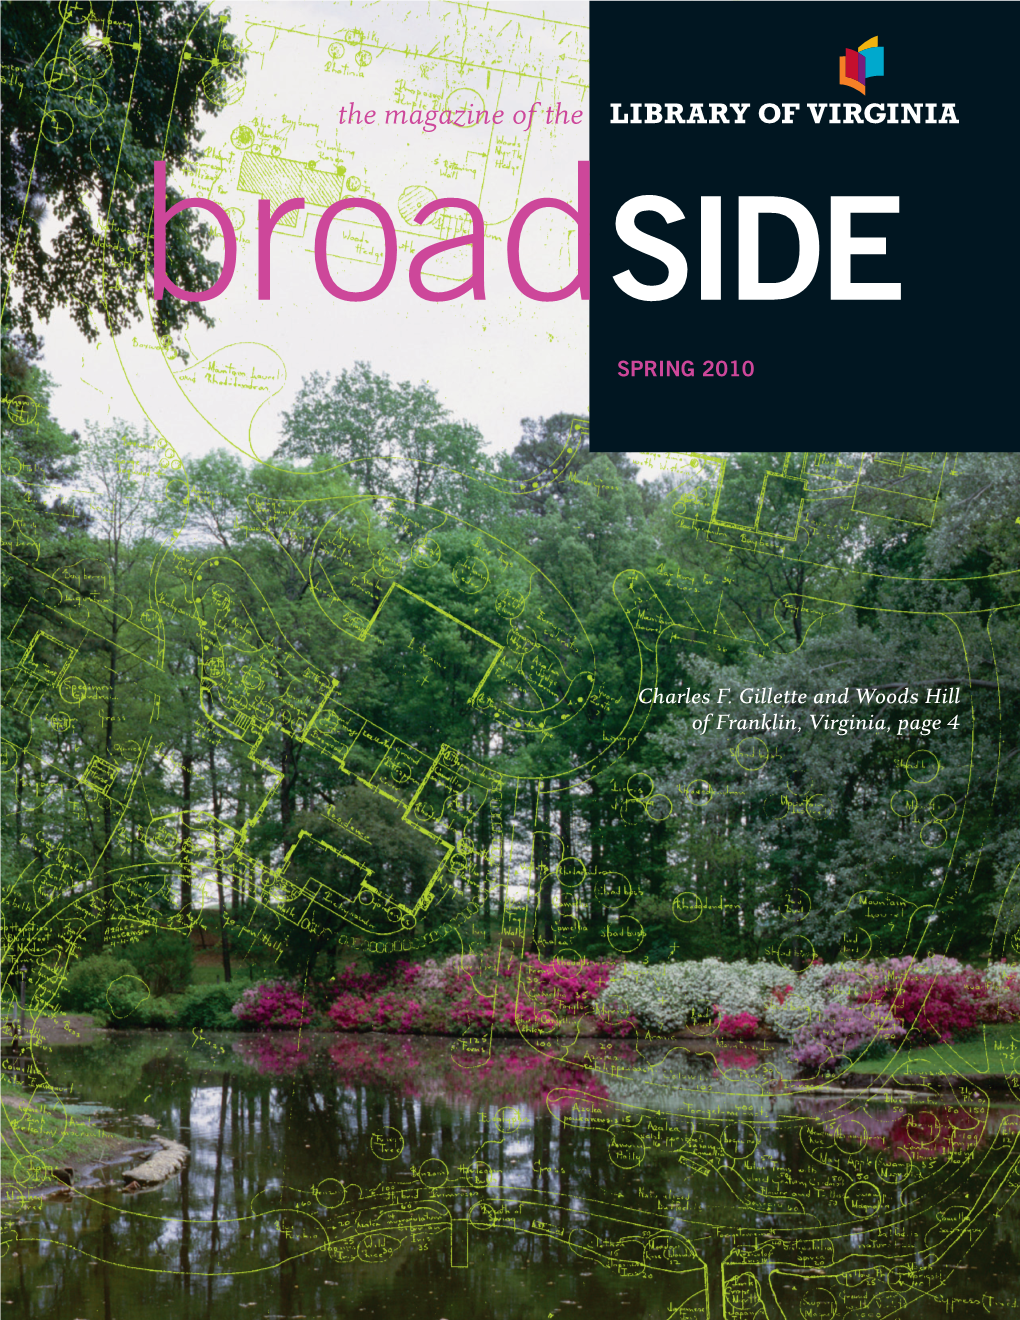 The Magazine of the Broadside SPRING 2010